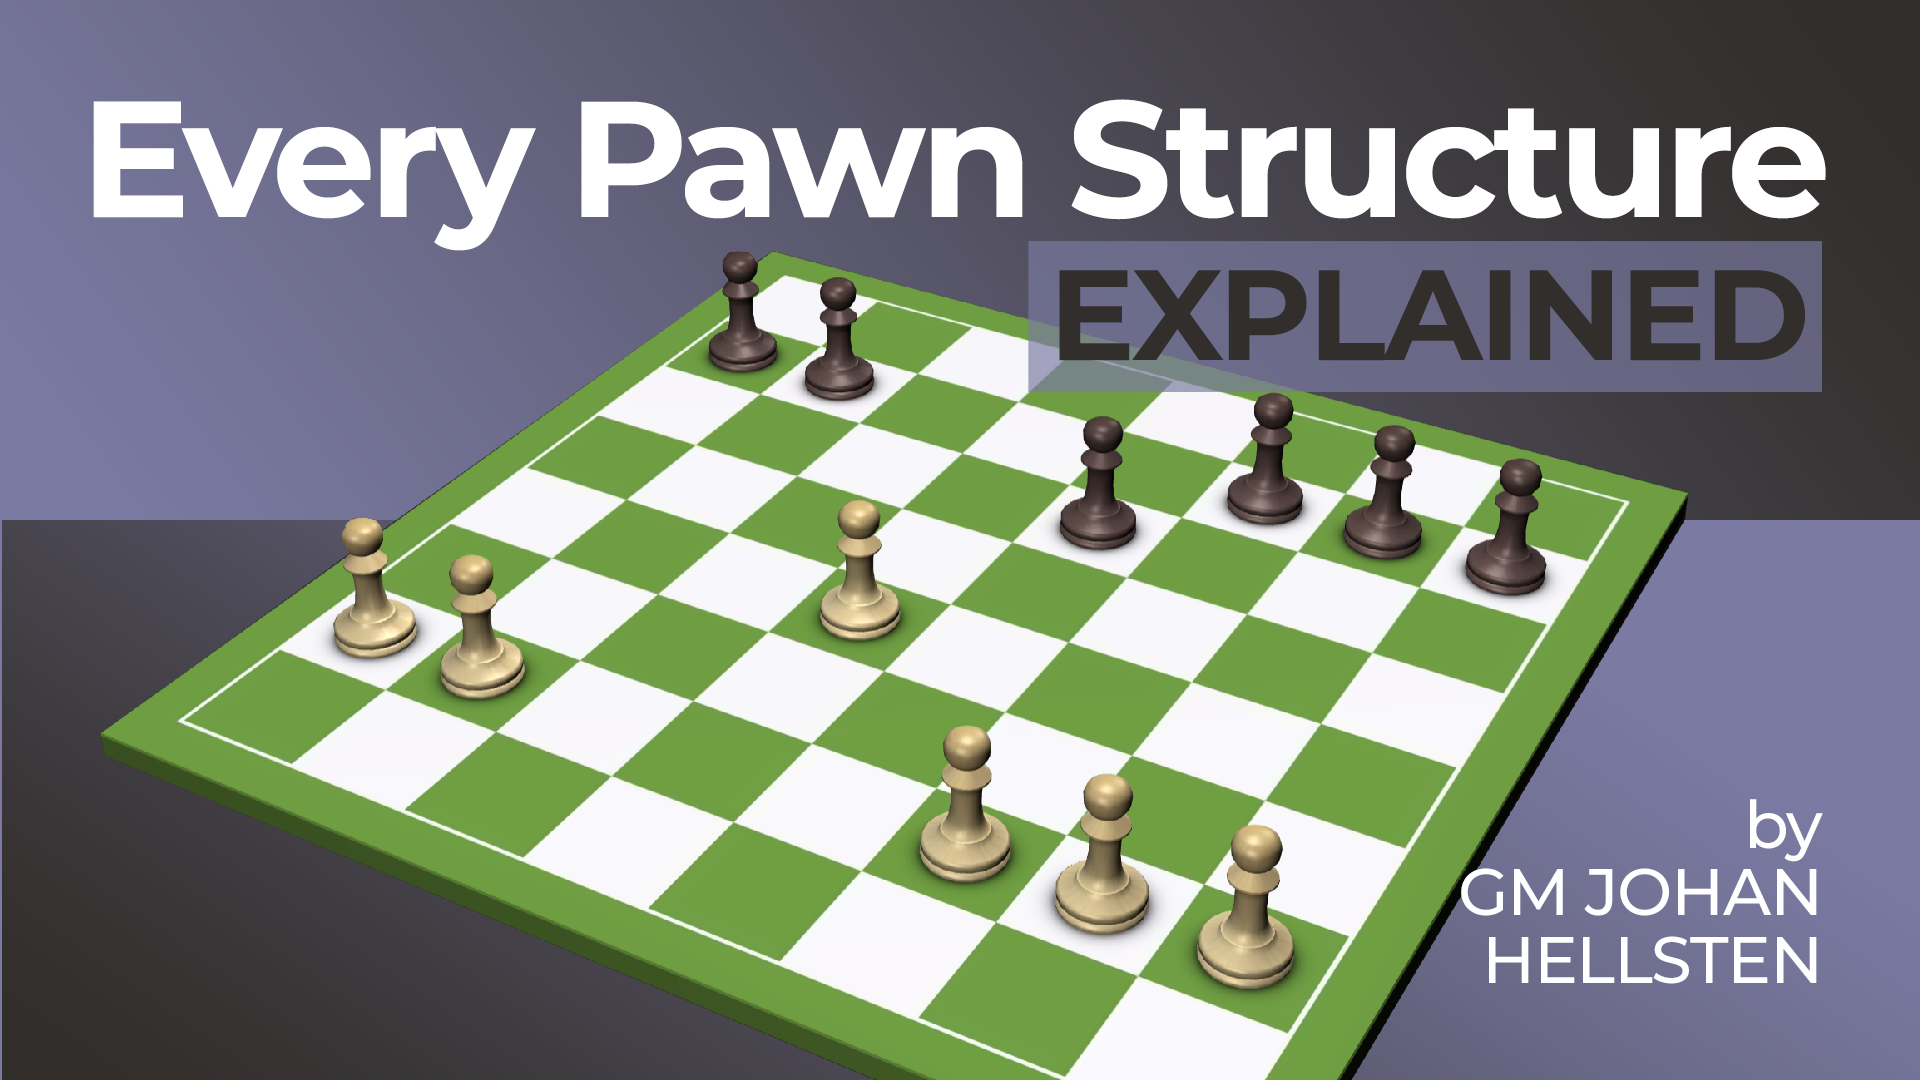 Is there a name for this sort of pawn structure? Any tips when